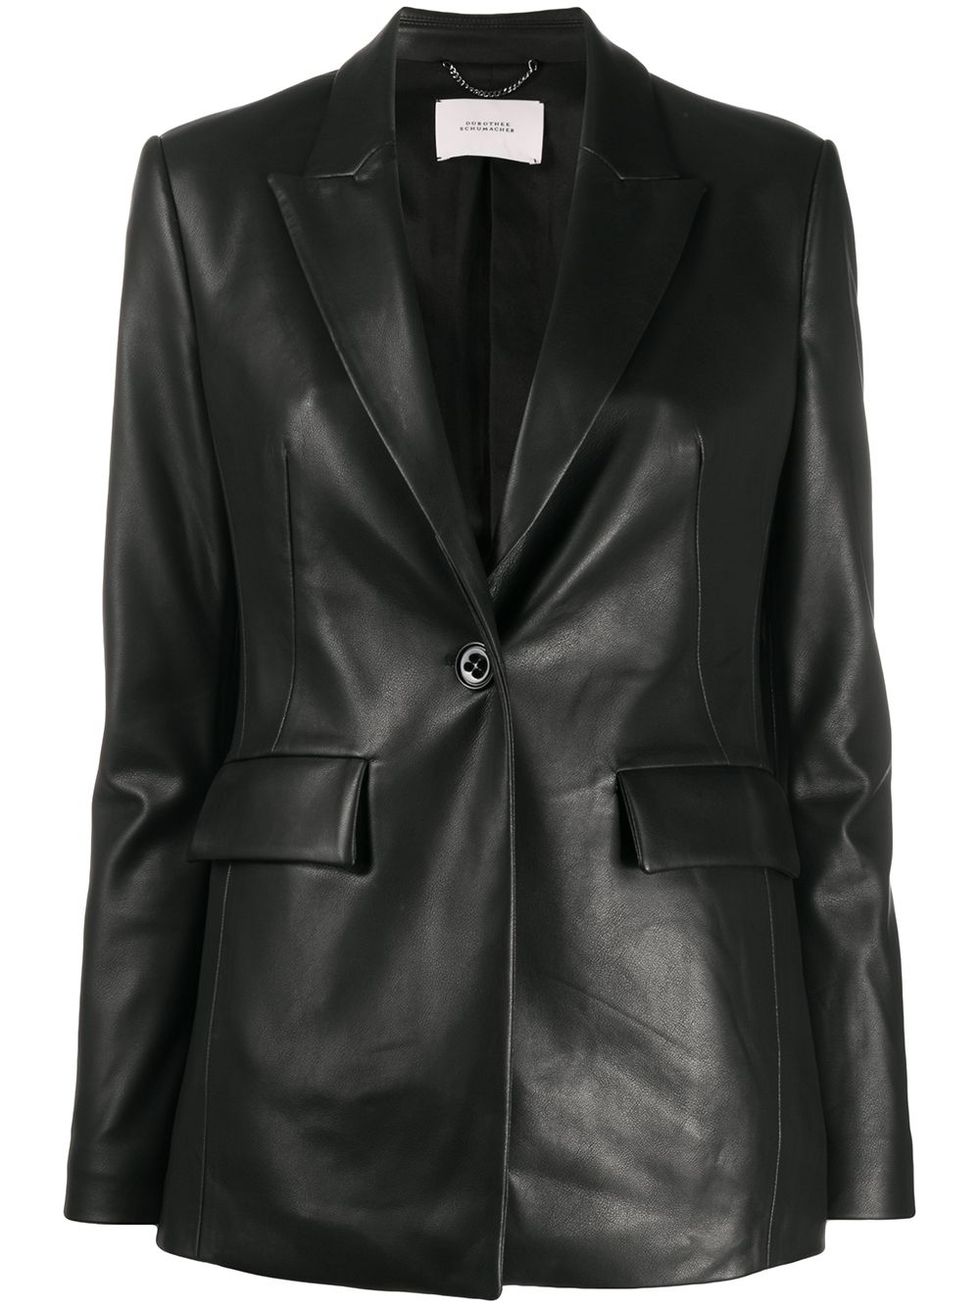 The Black Leather Blazer is Shaping Up to Be Fall's Key Piece